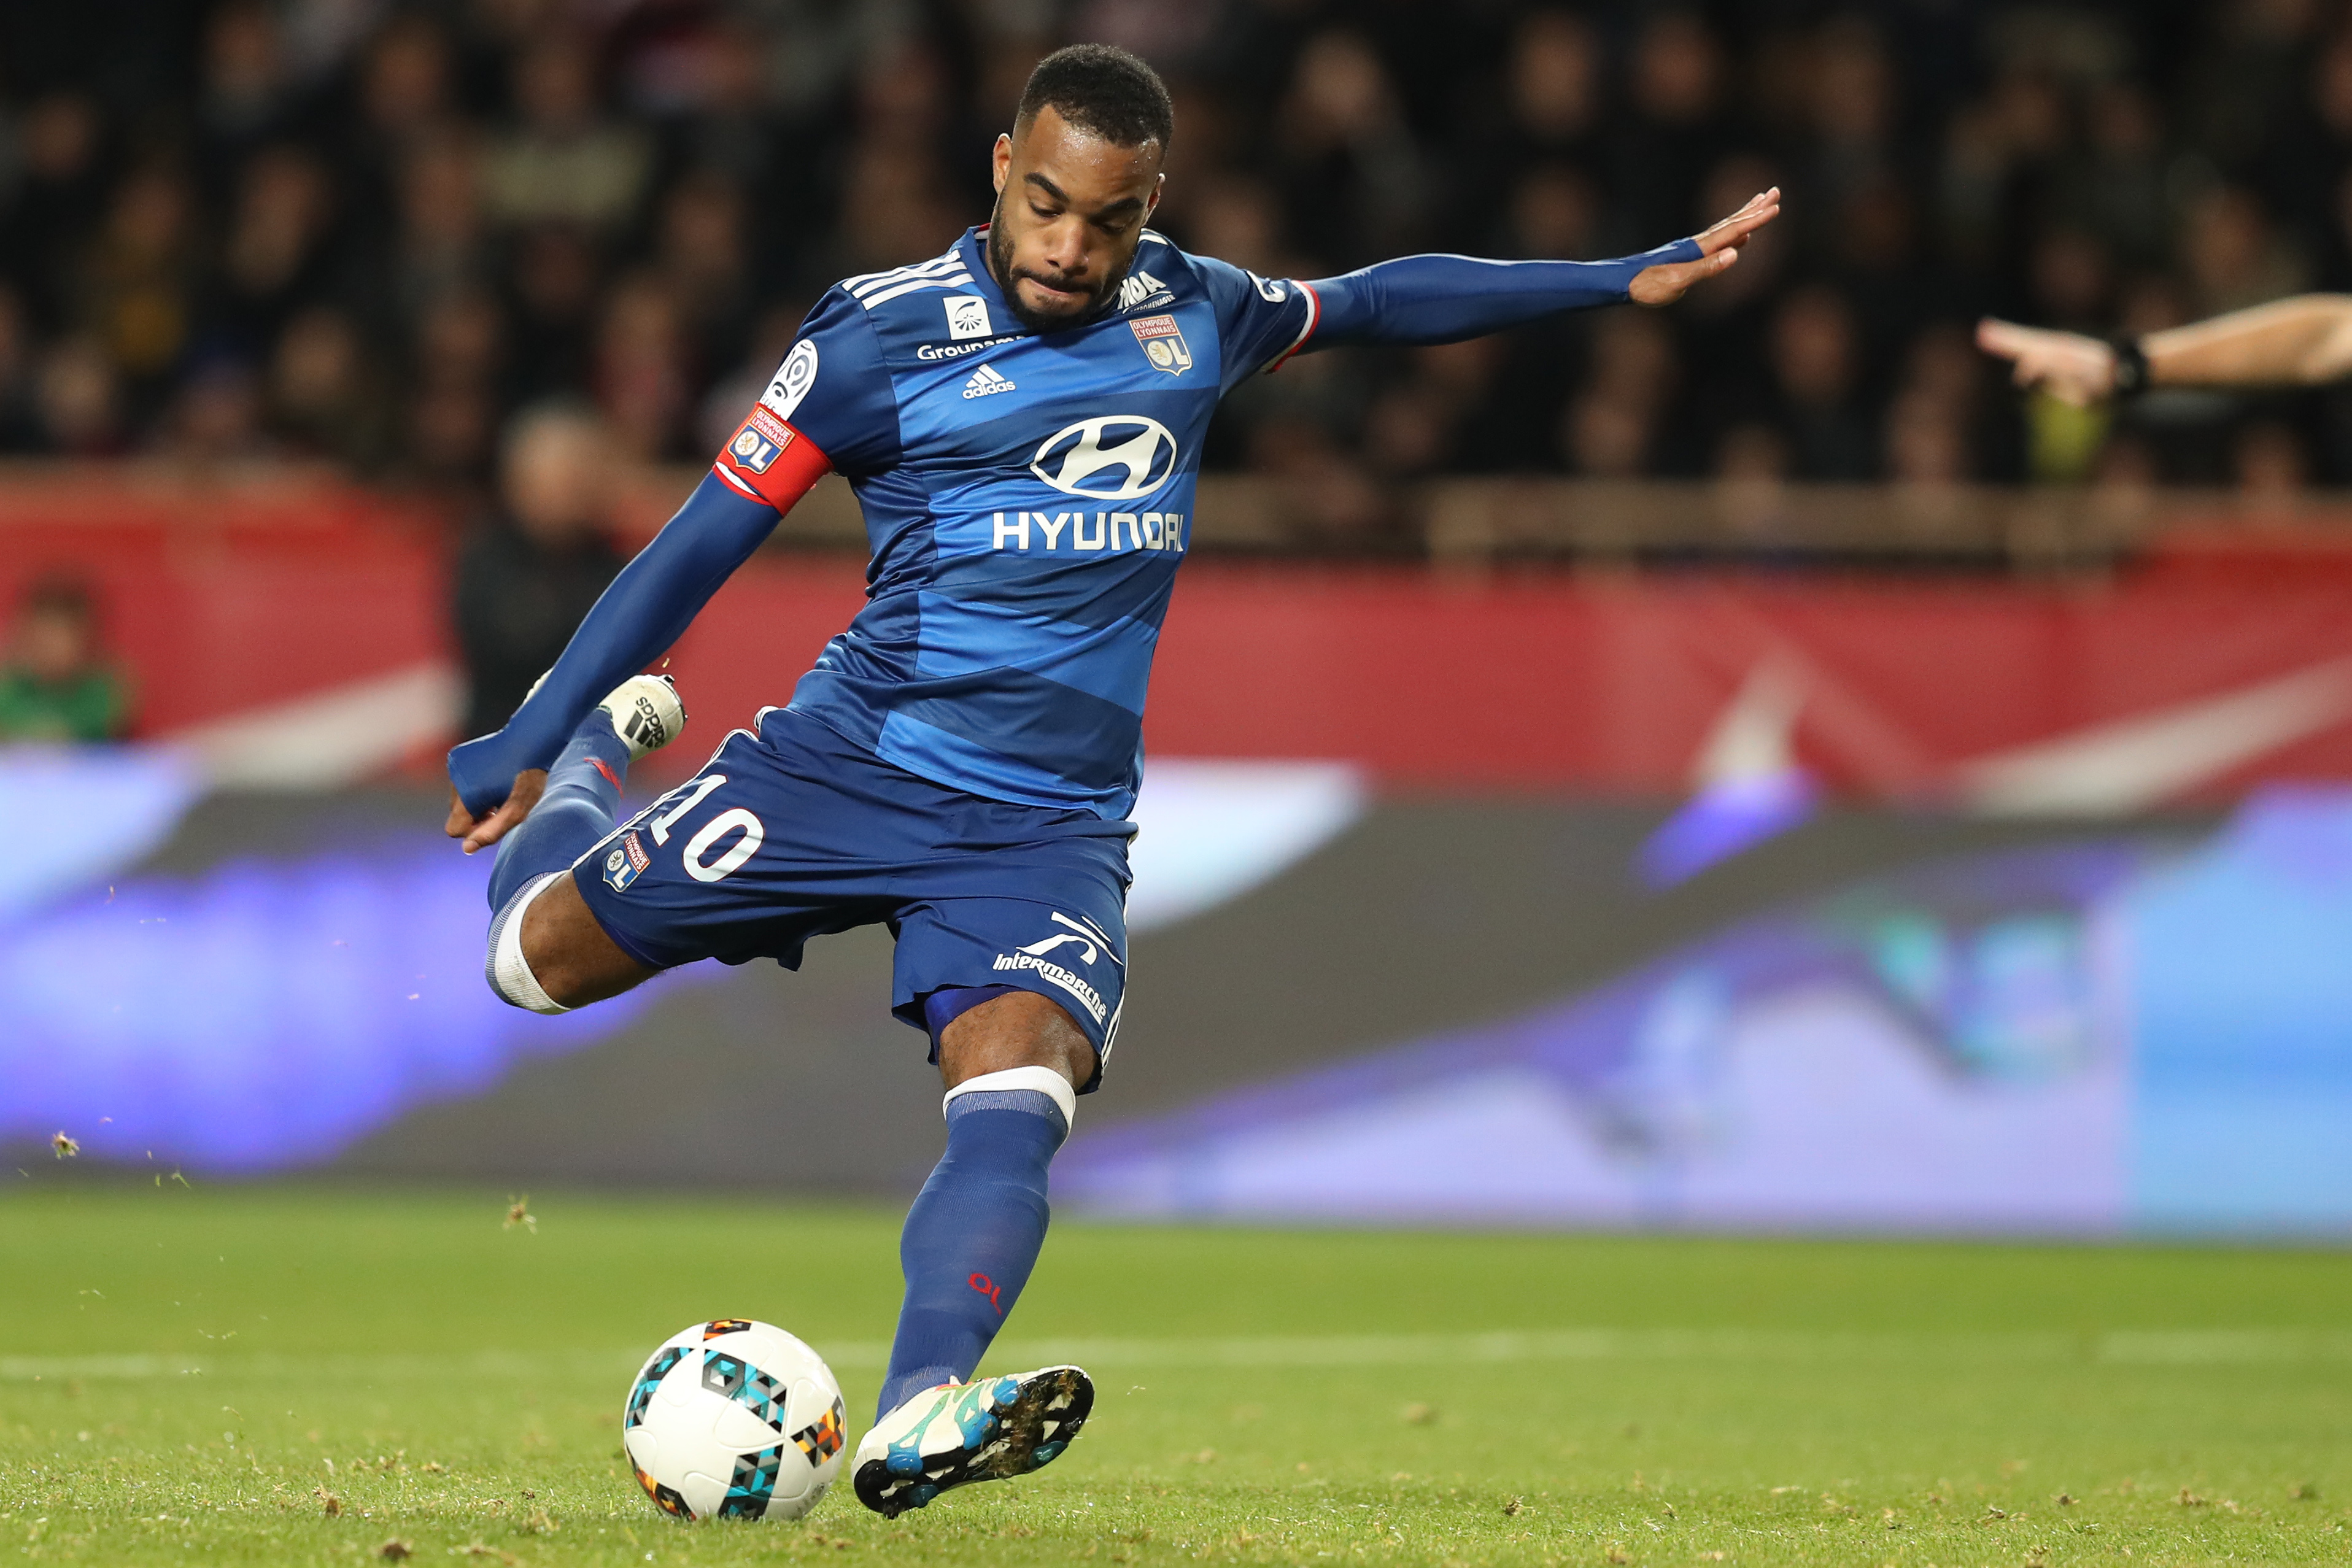 Lyon's French forward Alexandre Lacazette takes a penalty kick which he missed during the French L1 football match between AS Monaco and Lyon at the Louis II Stadium in Monaco on December 18, 2016. / AFP / VALERY HACHE        (Photo credit should read VALERY HACHE/AFP/Getty Images)